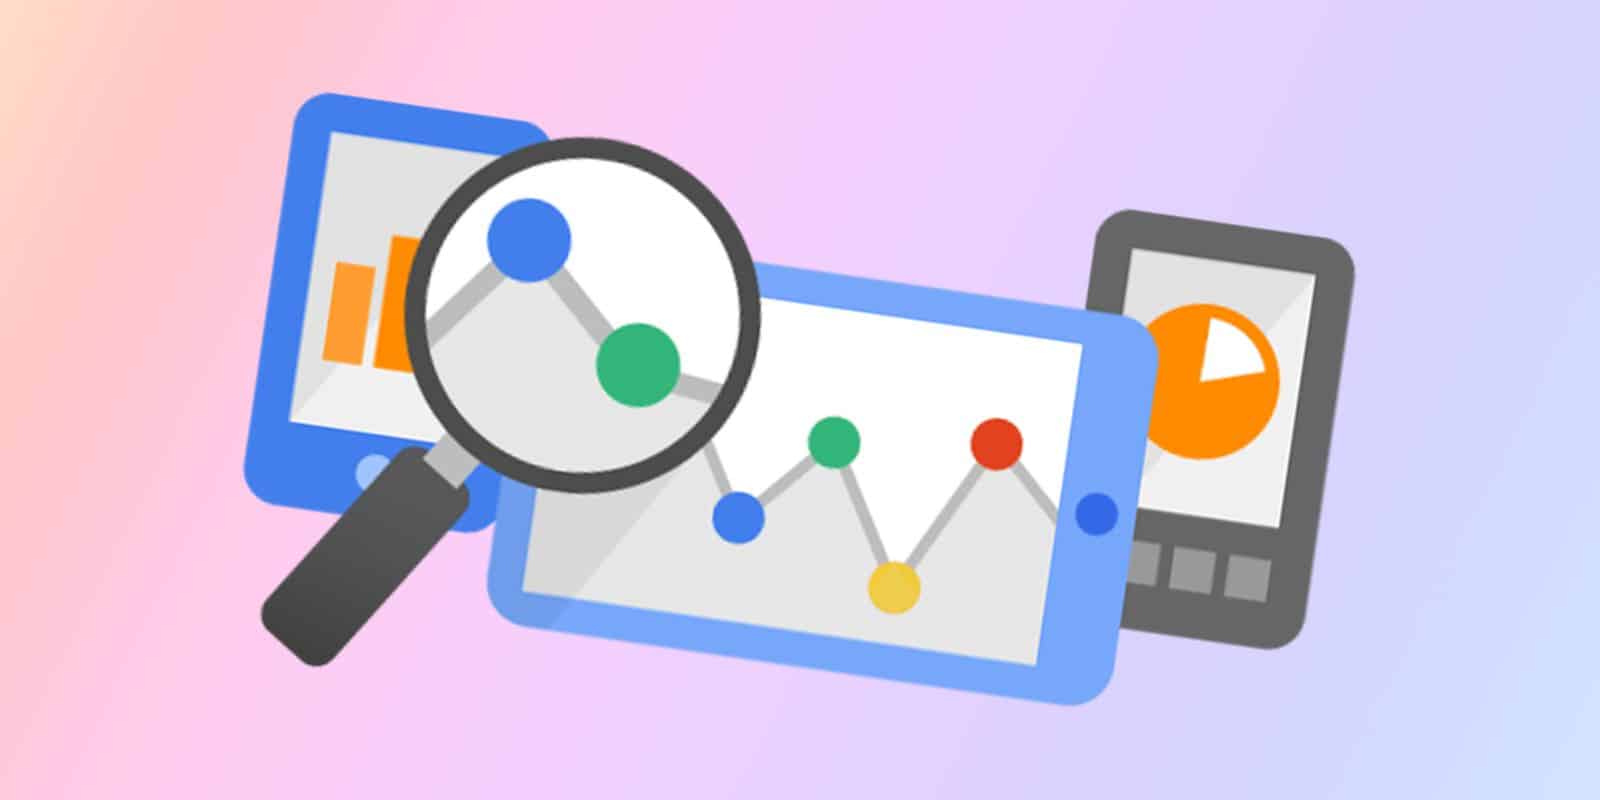 Track your results when implementing local seo